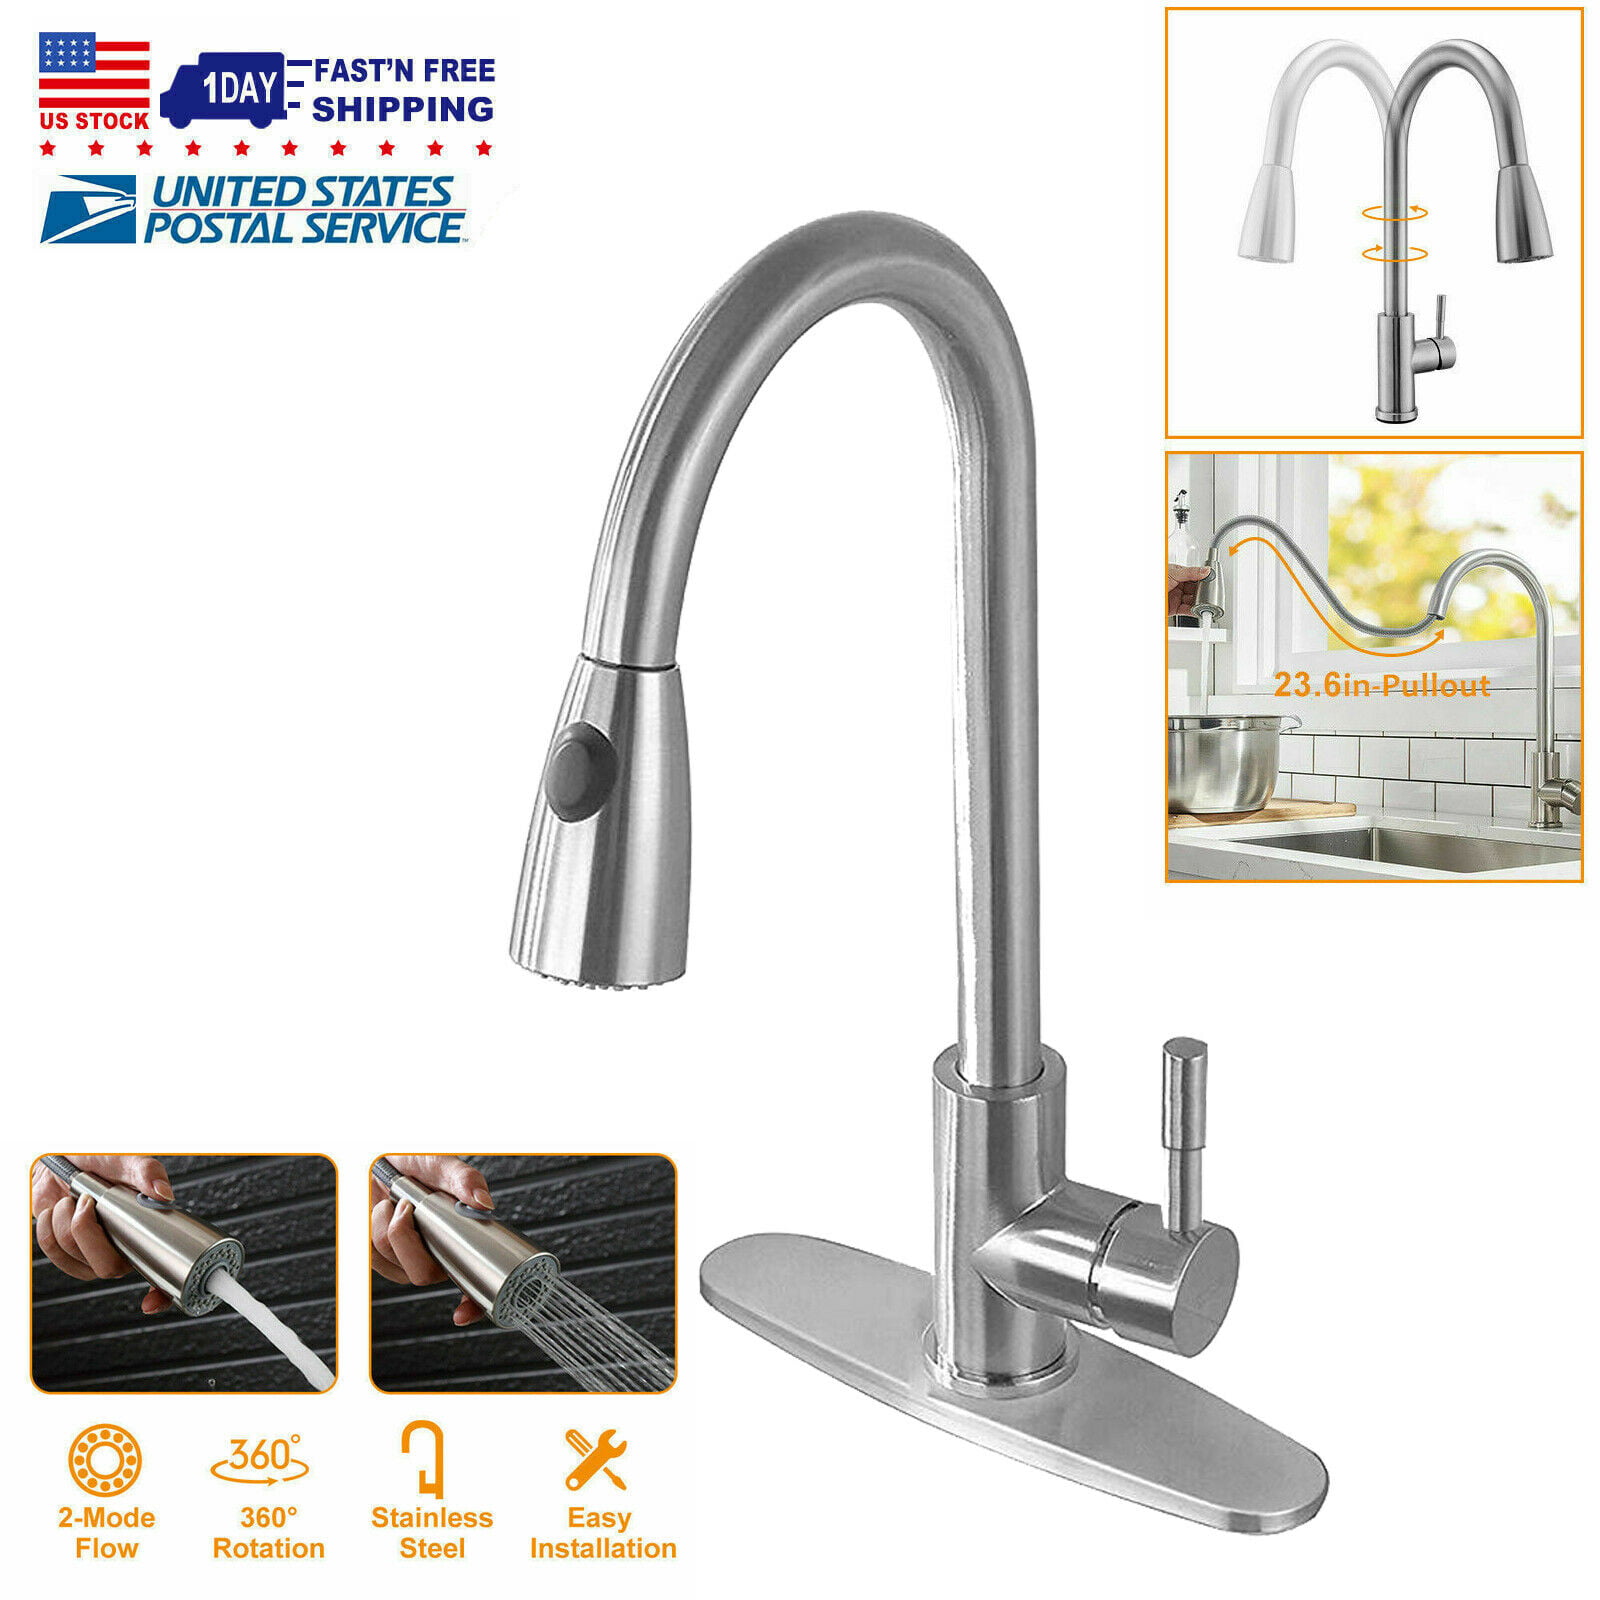 Details about  / Home Kitchen Brushed Nickel Sink Faucet Pull Out Sprayer Faucet Swivel Mixer Tap